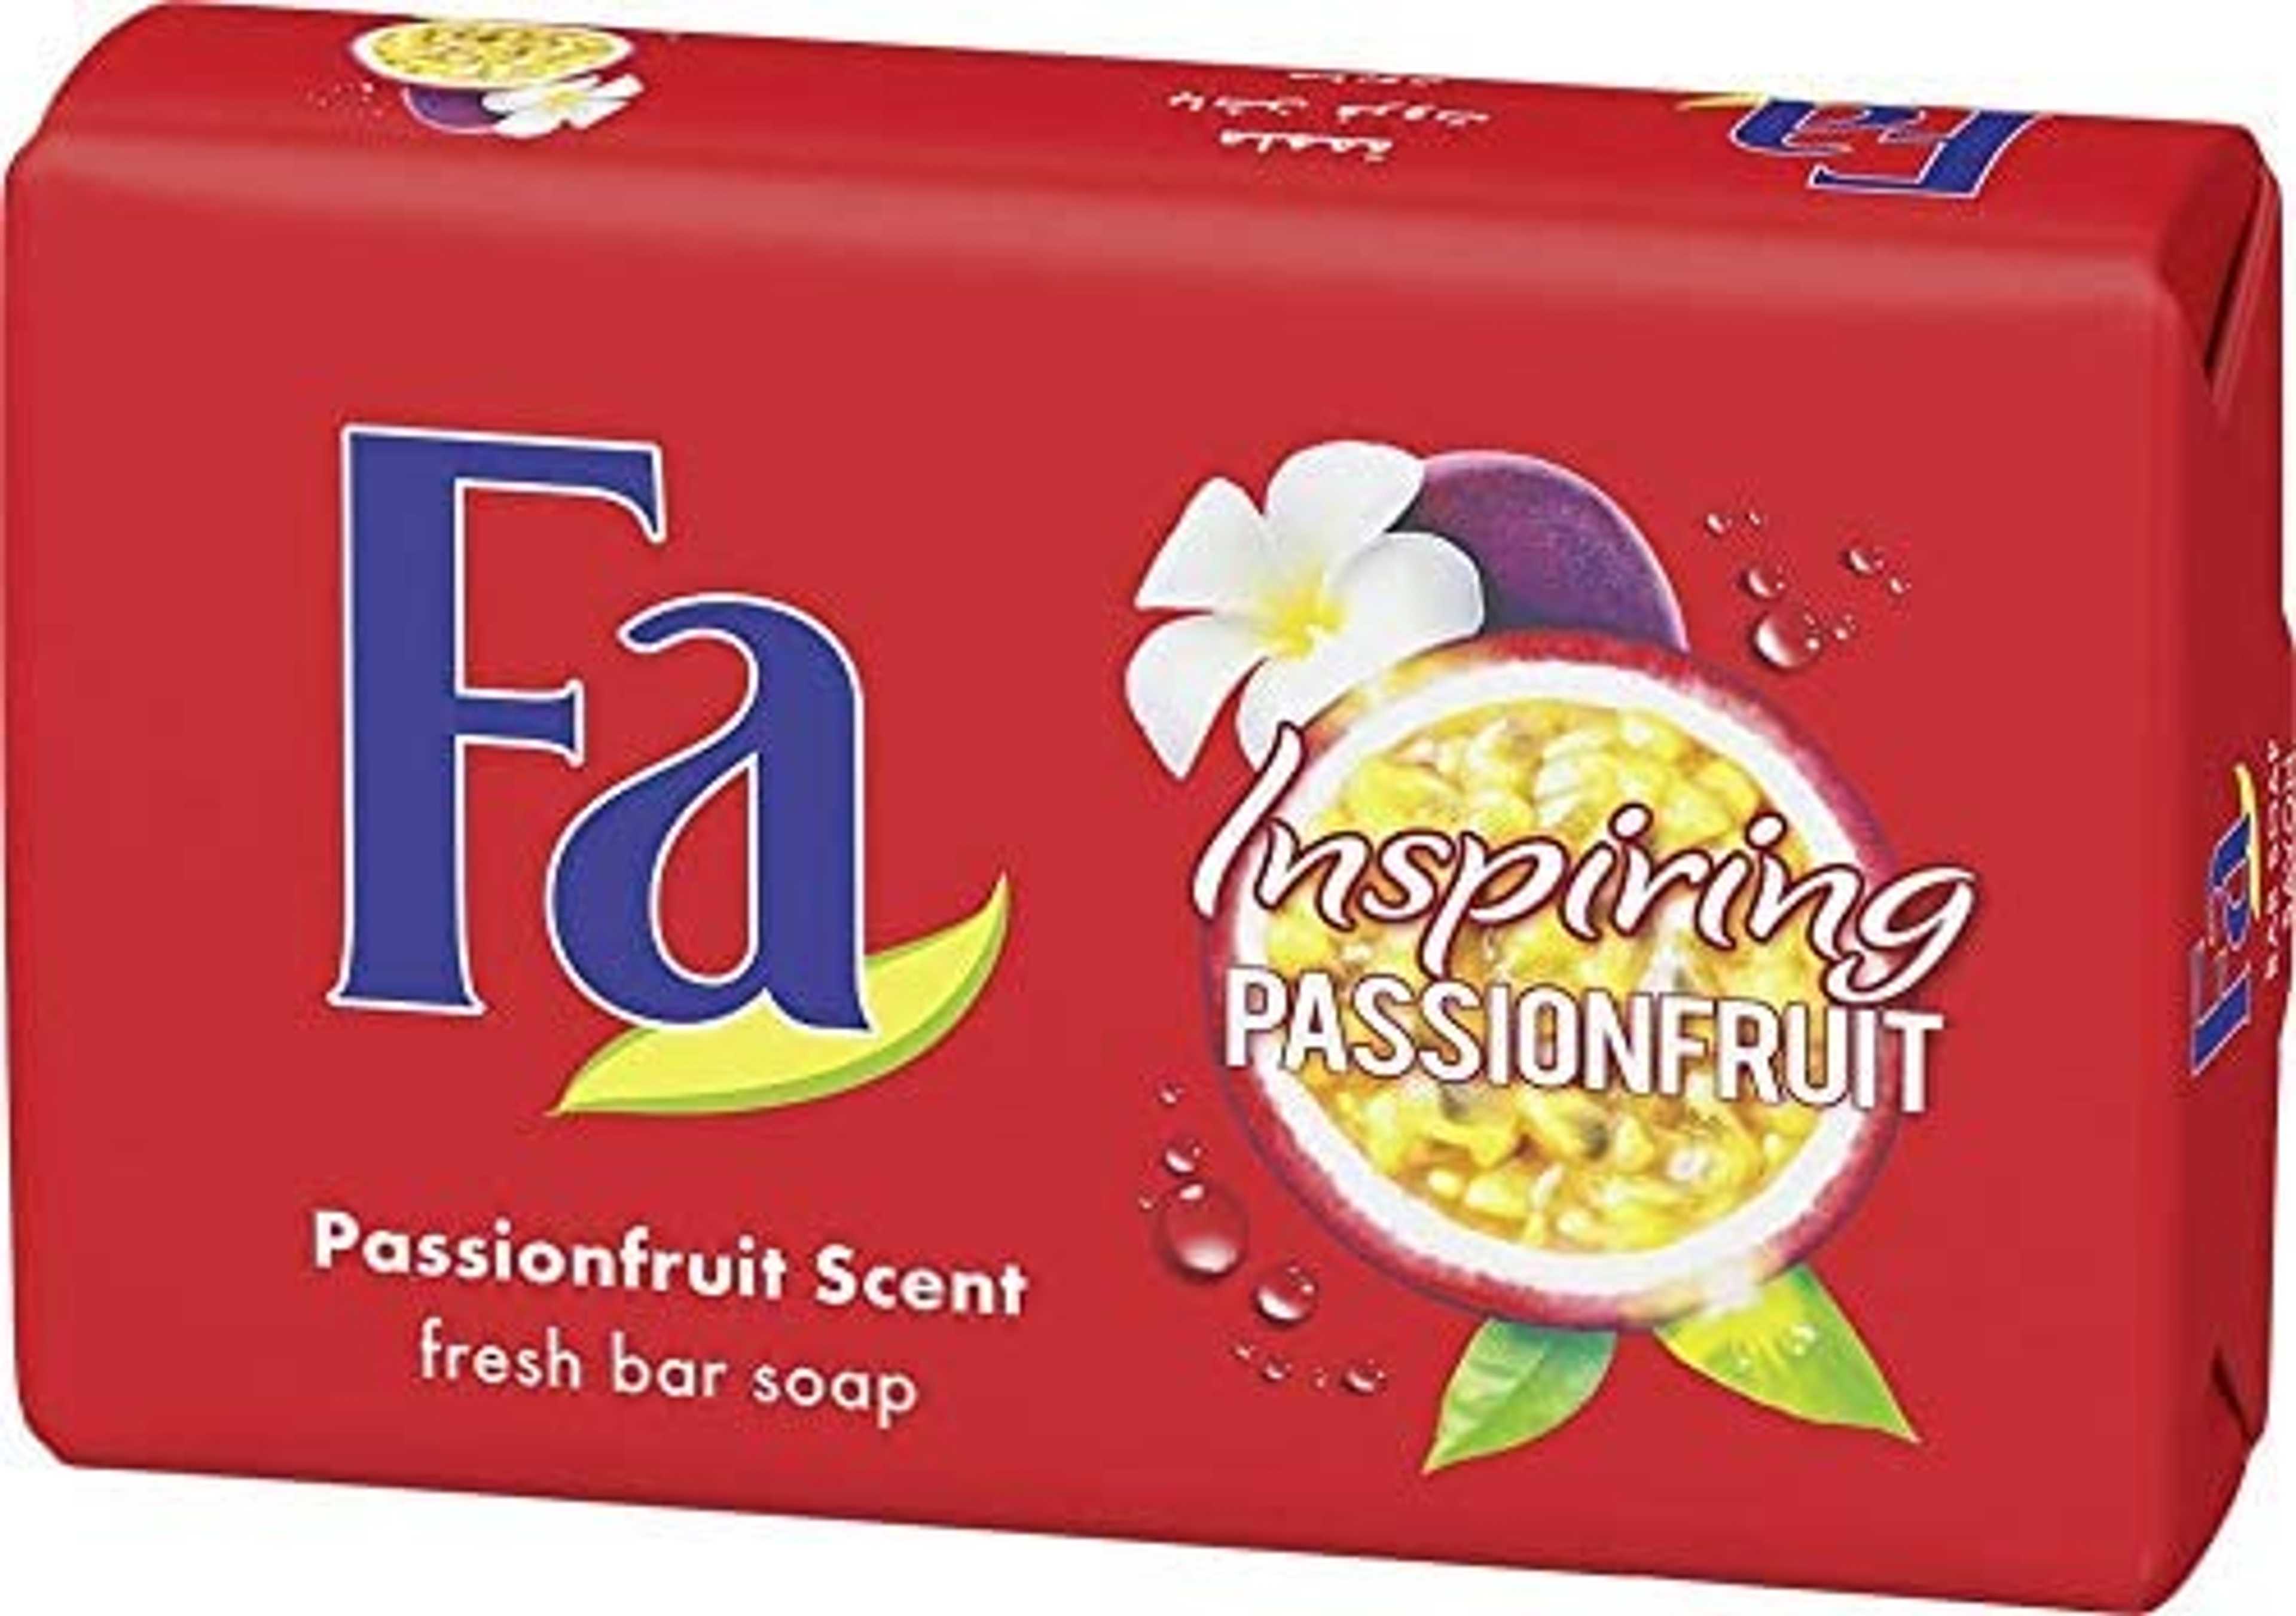 FA SOAP INSPIRING PASSIONFRUIT 175G (Imported)